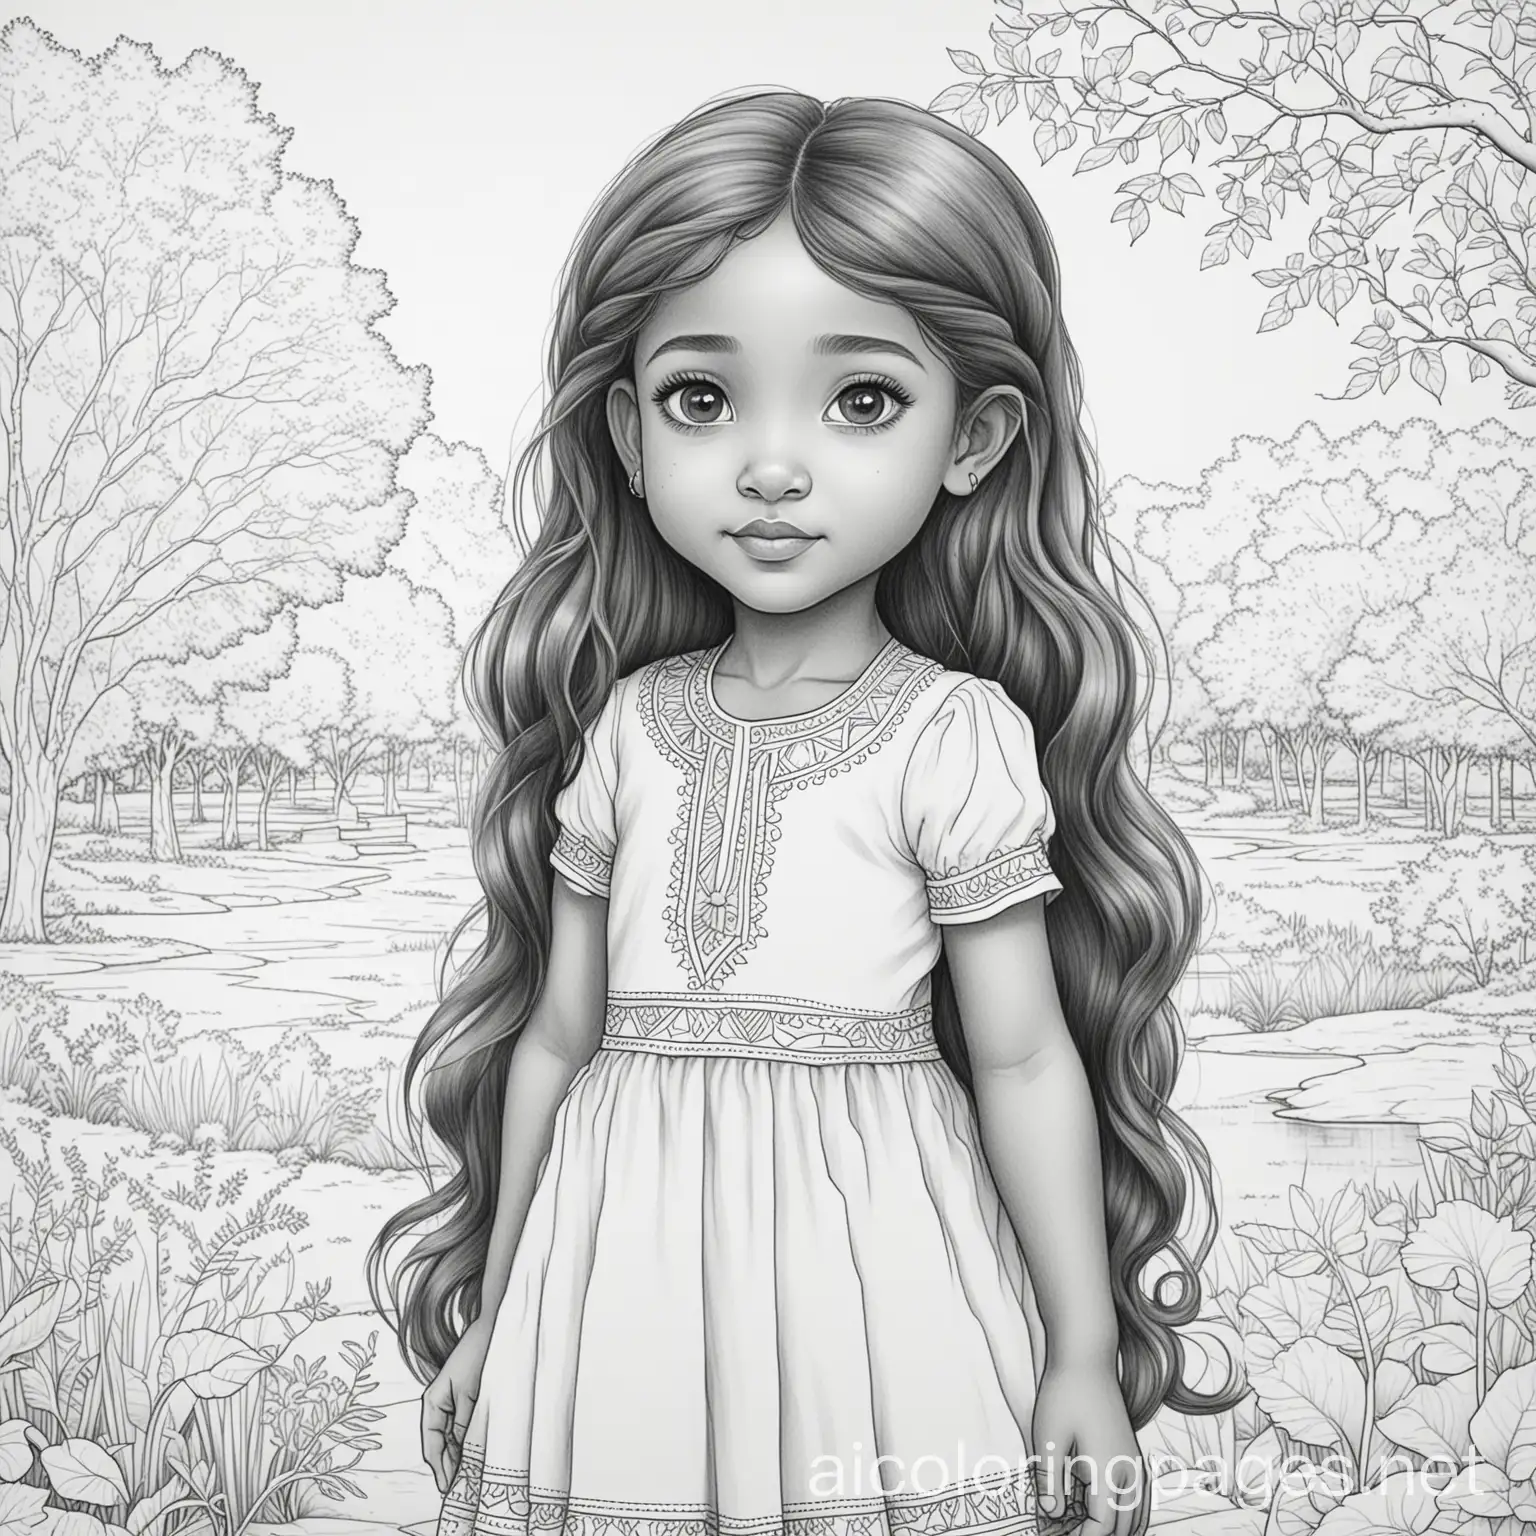 AfricanIndian-Girl-with-Long-Hair-Coloring-Page-for-Kids